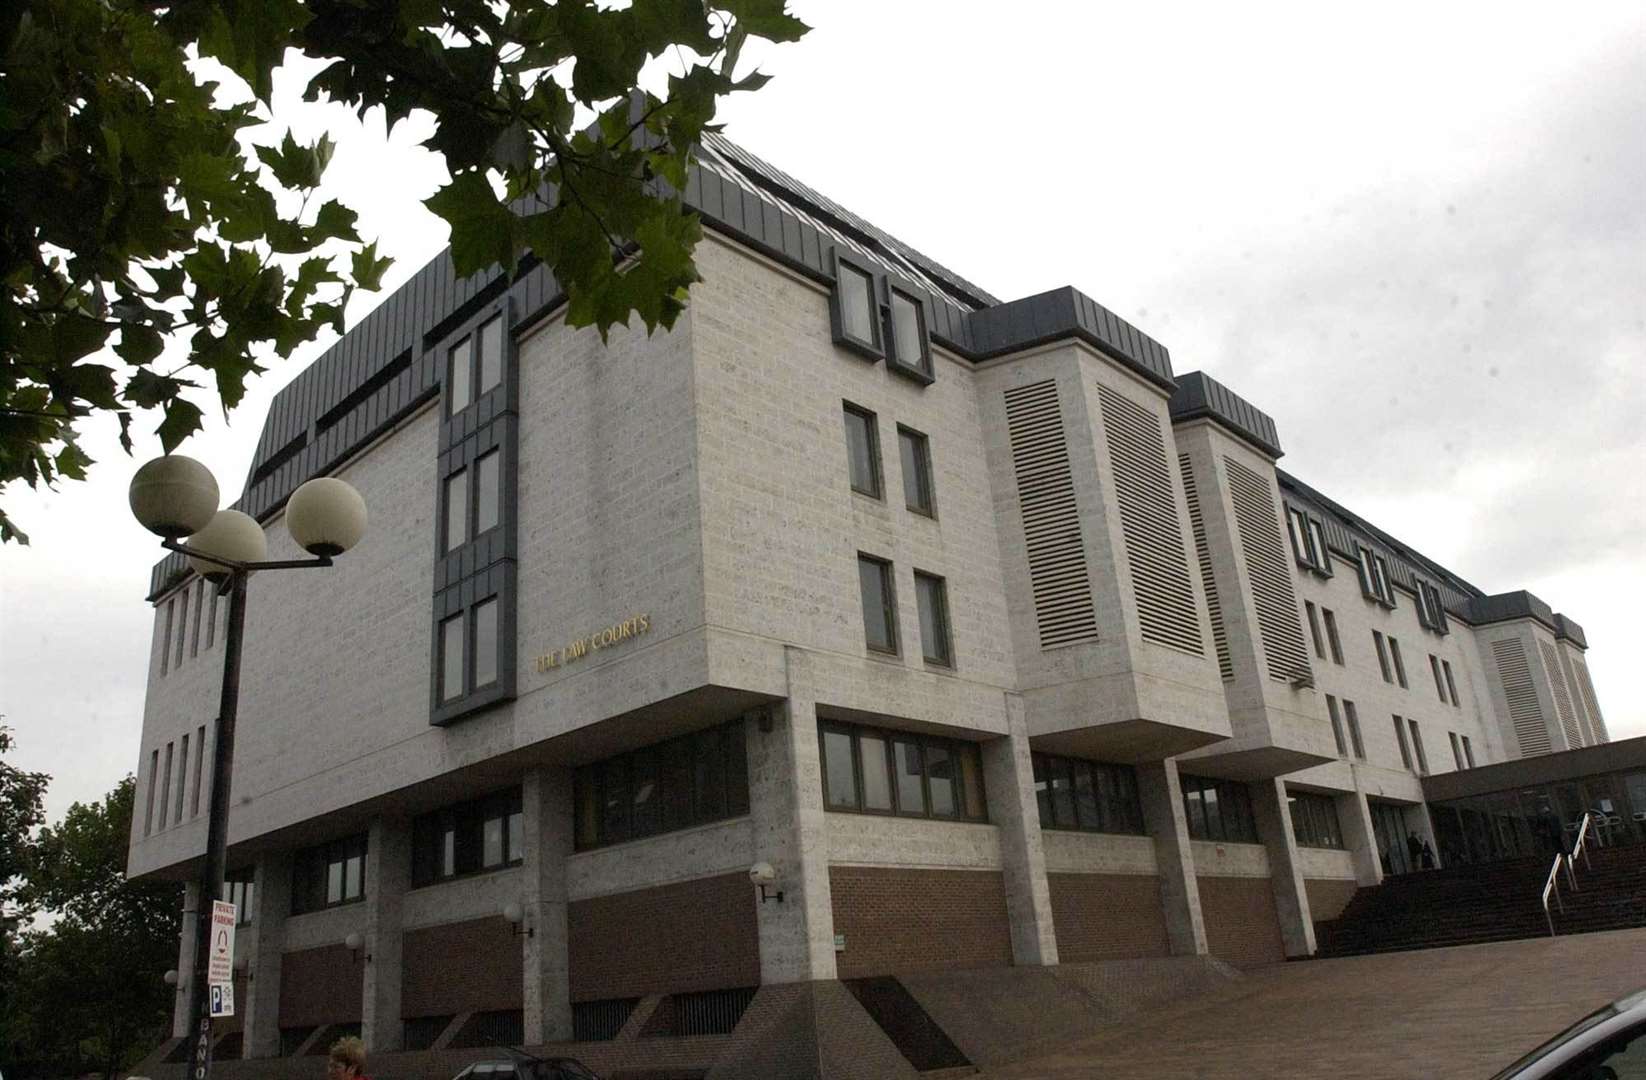 Cottrell appeared at Maidstone Crown Court